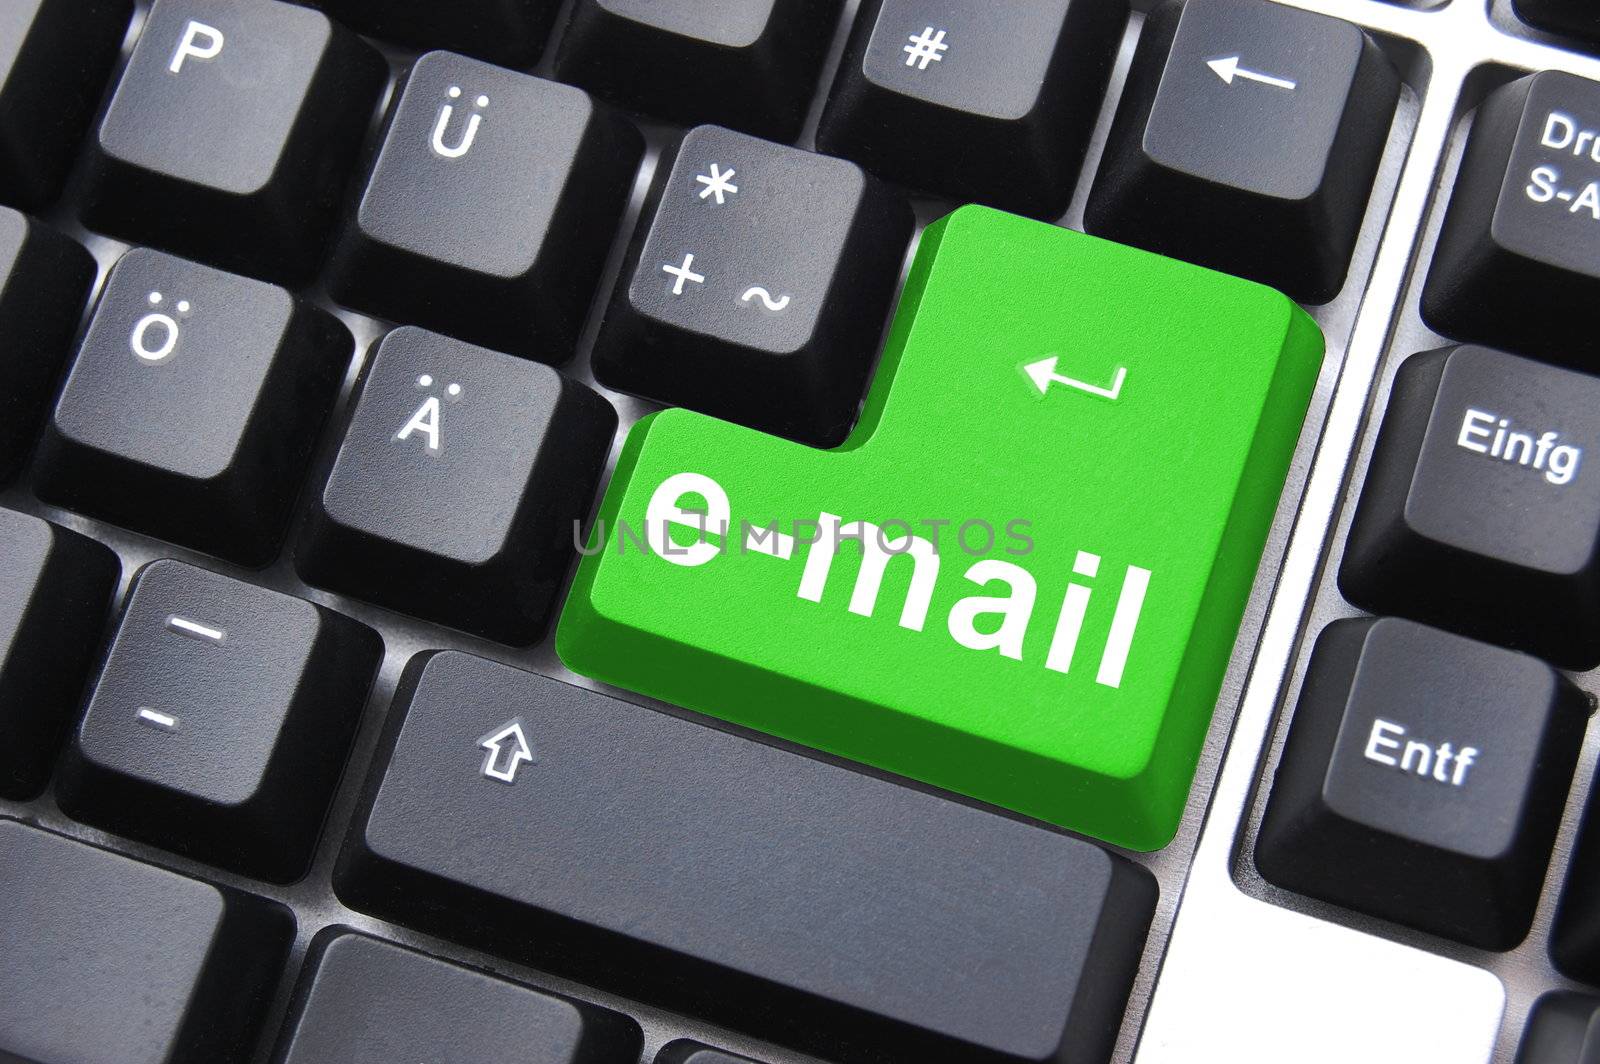 email button on computer keyboard showing concept for internet communication